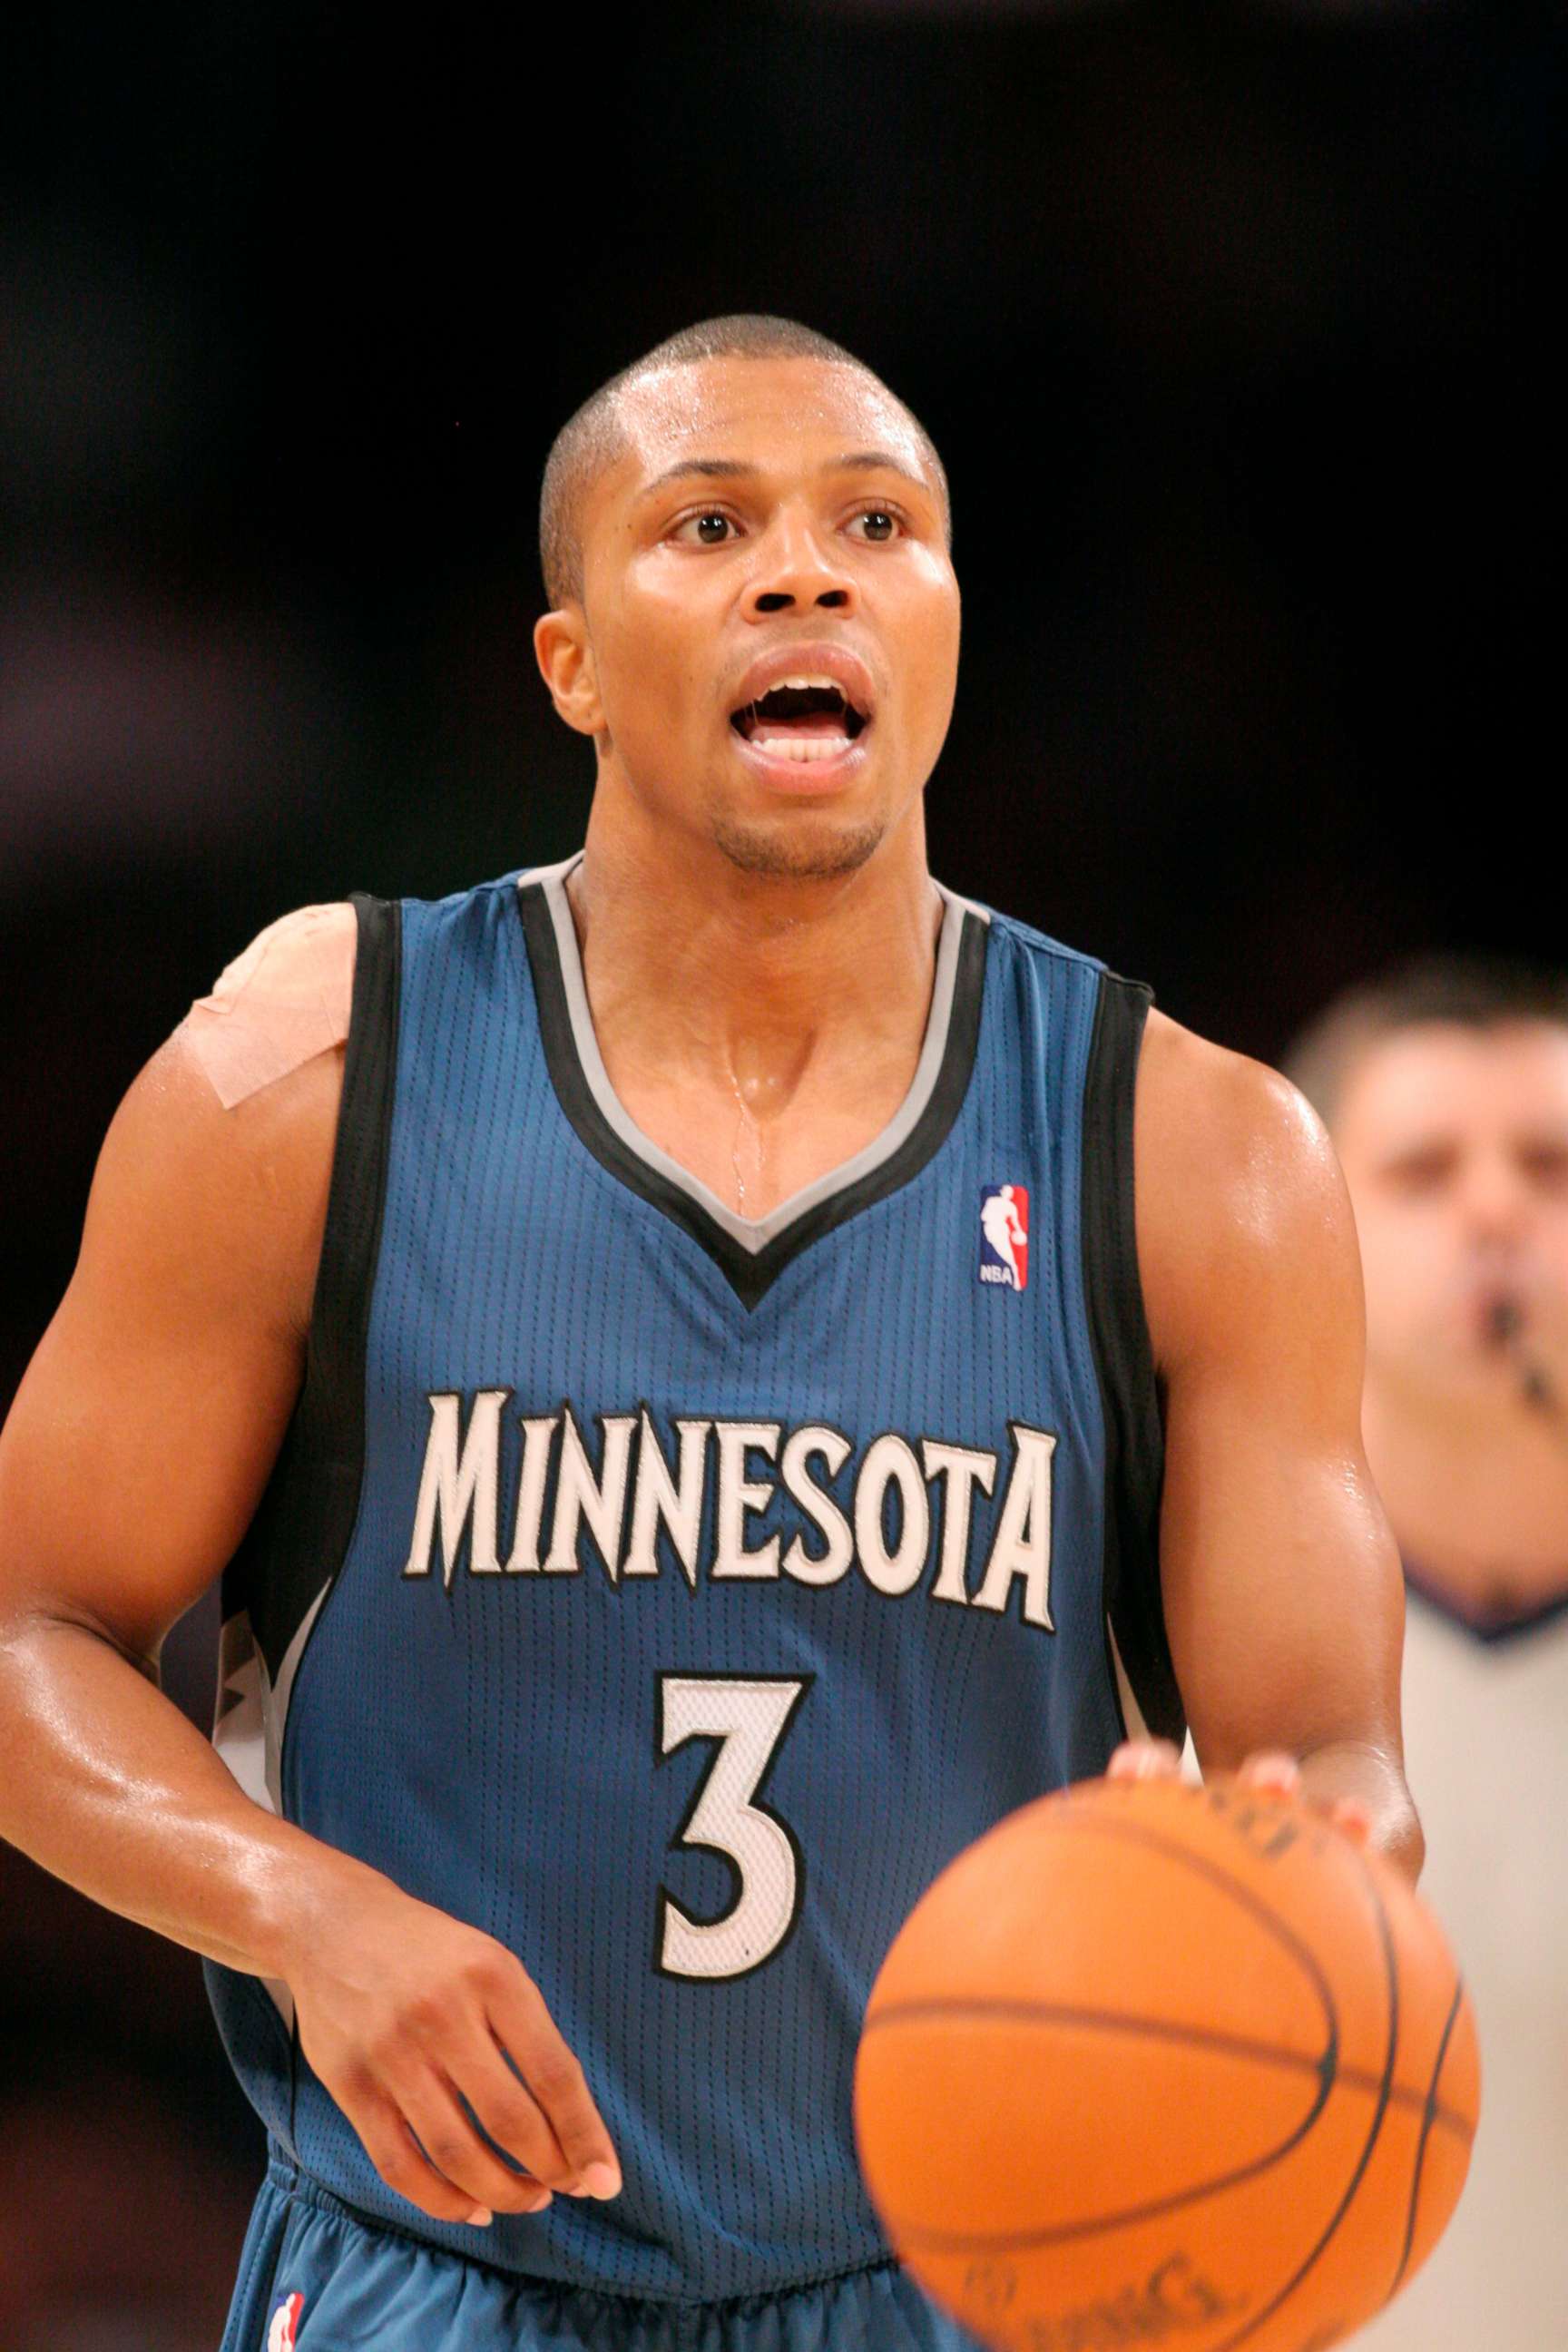 PHOTO: Minnesota Timberwolves guard Sebastian Telfair makes a move with the basketball against the Los Angeles Lakers during an NBA game, Nov. 9, 2010 in Los Angeles.